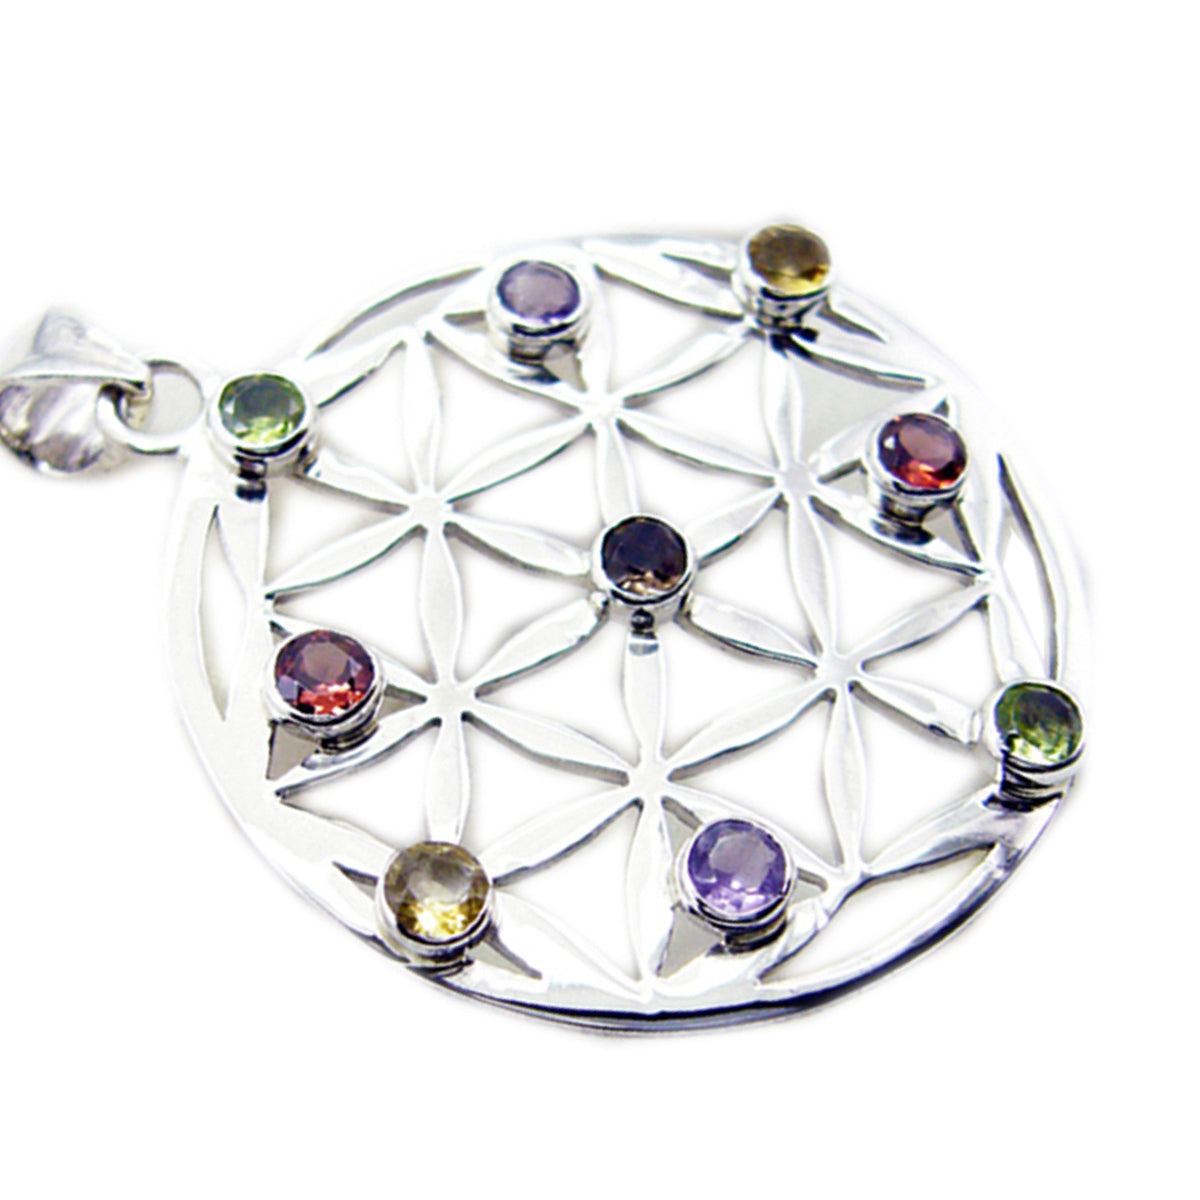 Riyo Spunky Gems Round Faceted Multi Color Multi Stone Solid Silver Pendant Gift For Easter Sunday